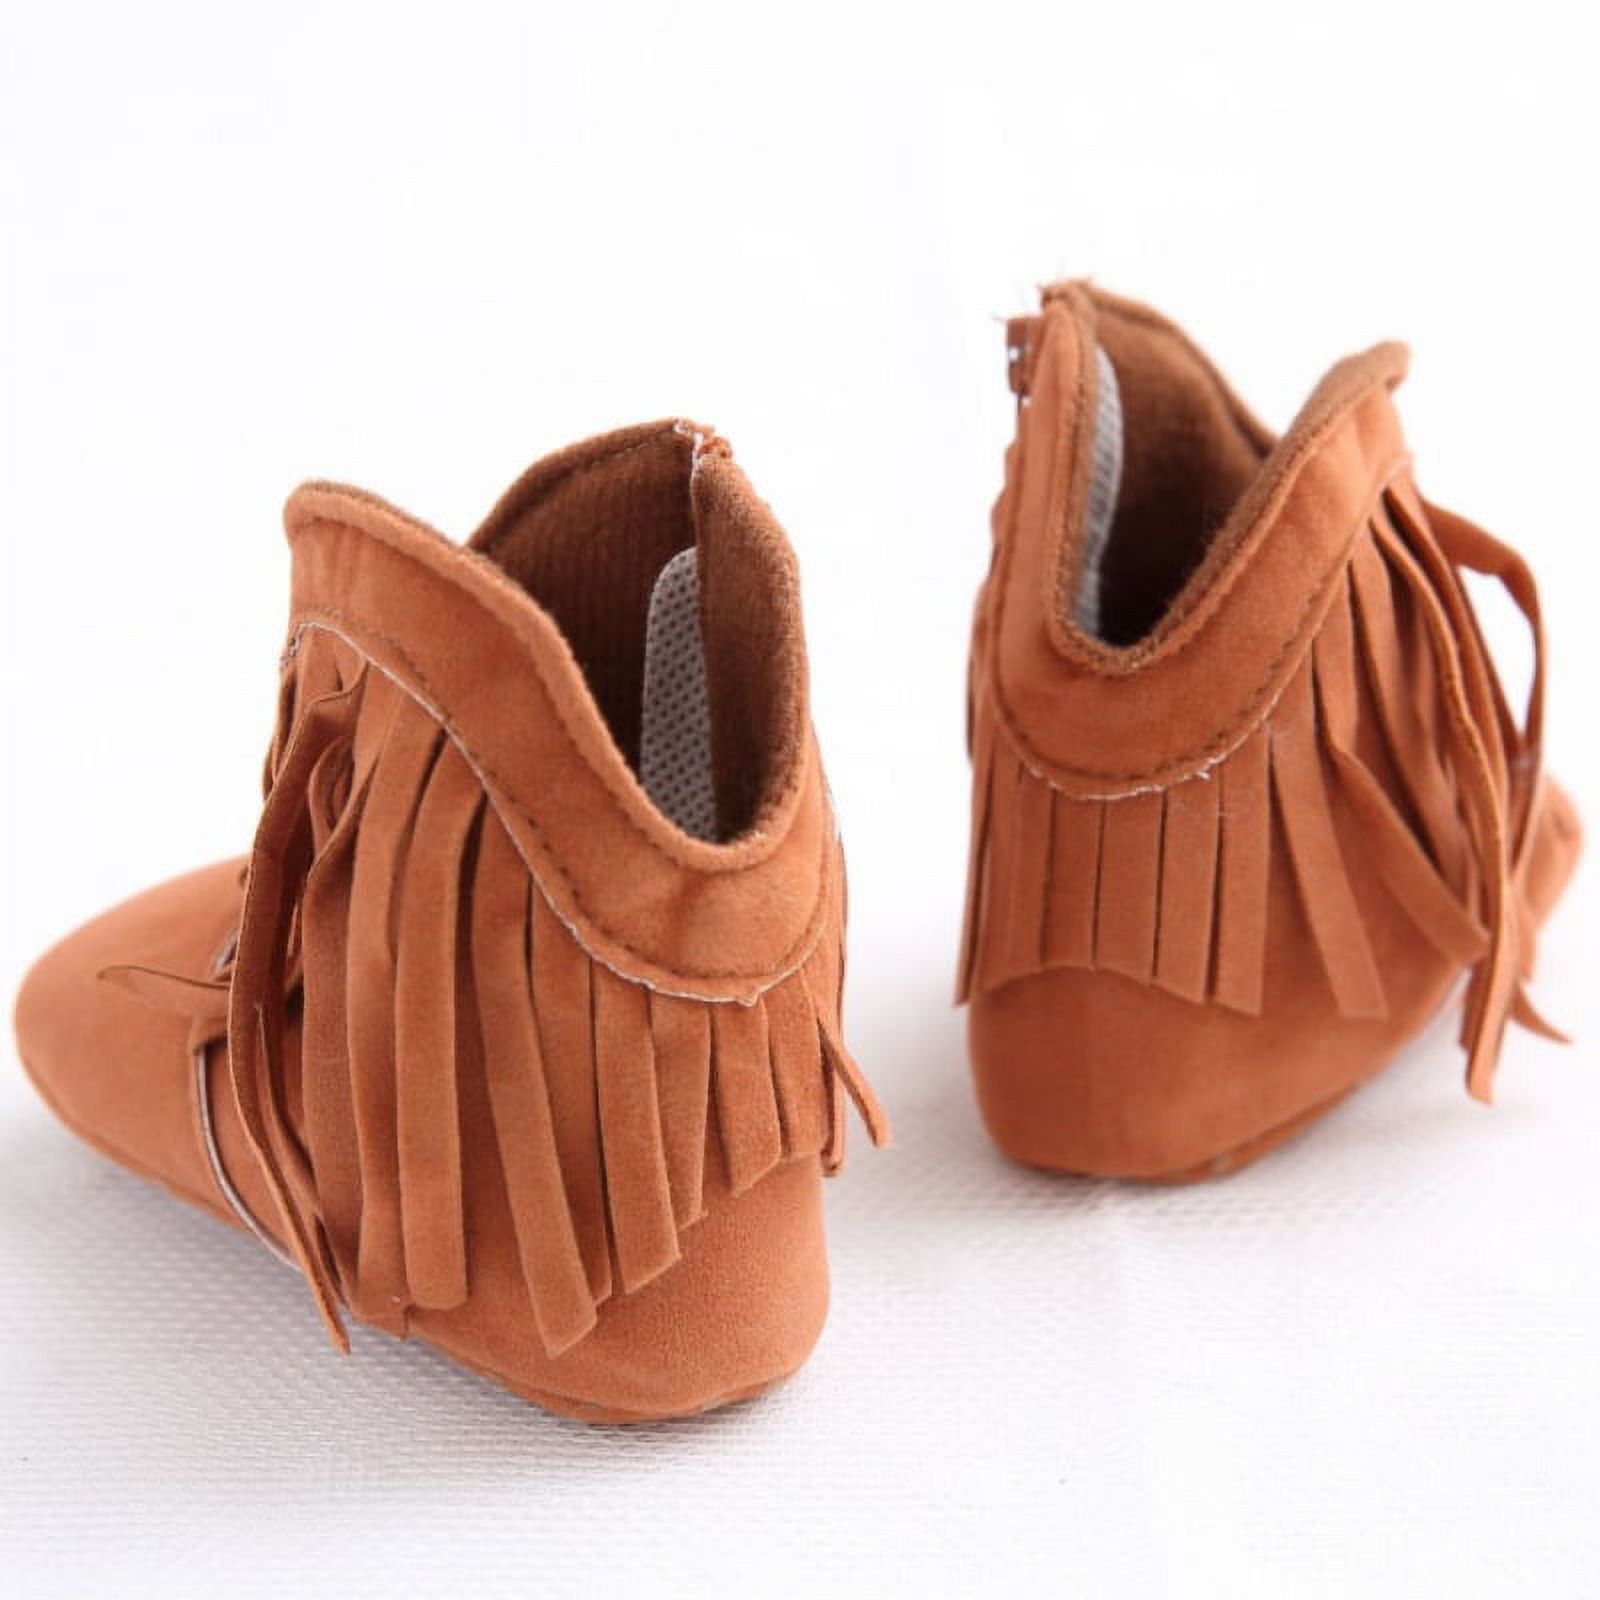 Fymall Infant Toddler Tassel Boots Baby Boy Girl Soft Soled Winter Shoes - image 3 of 5